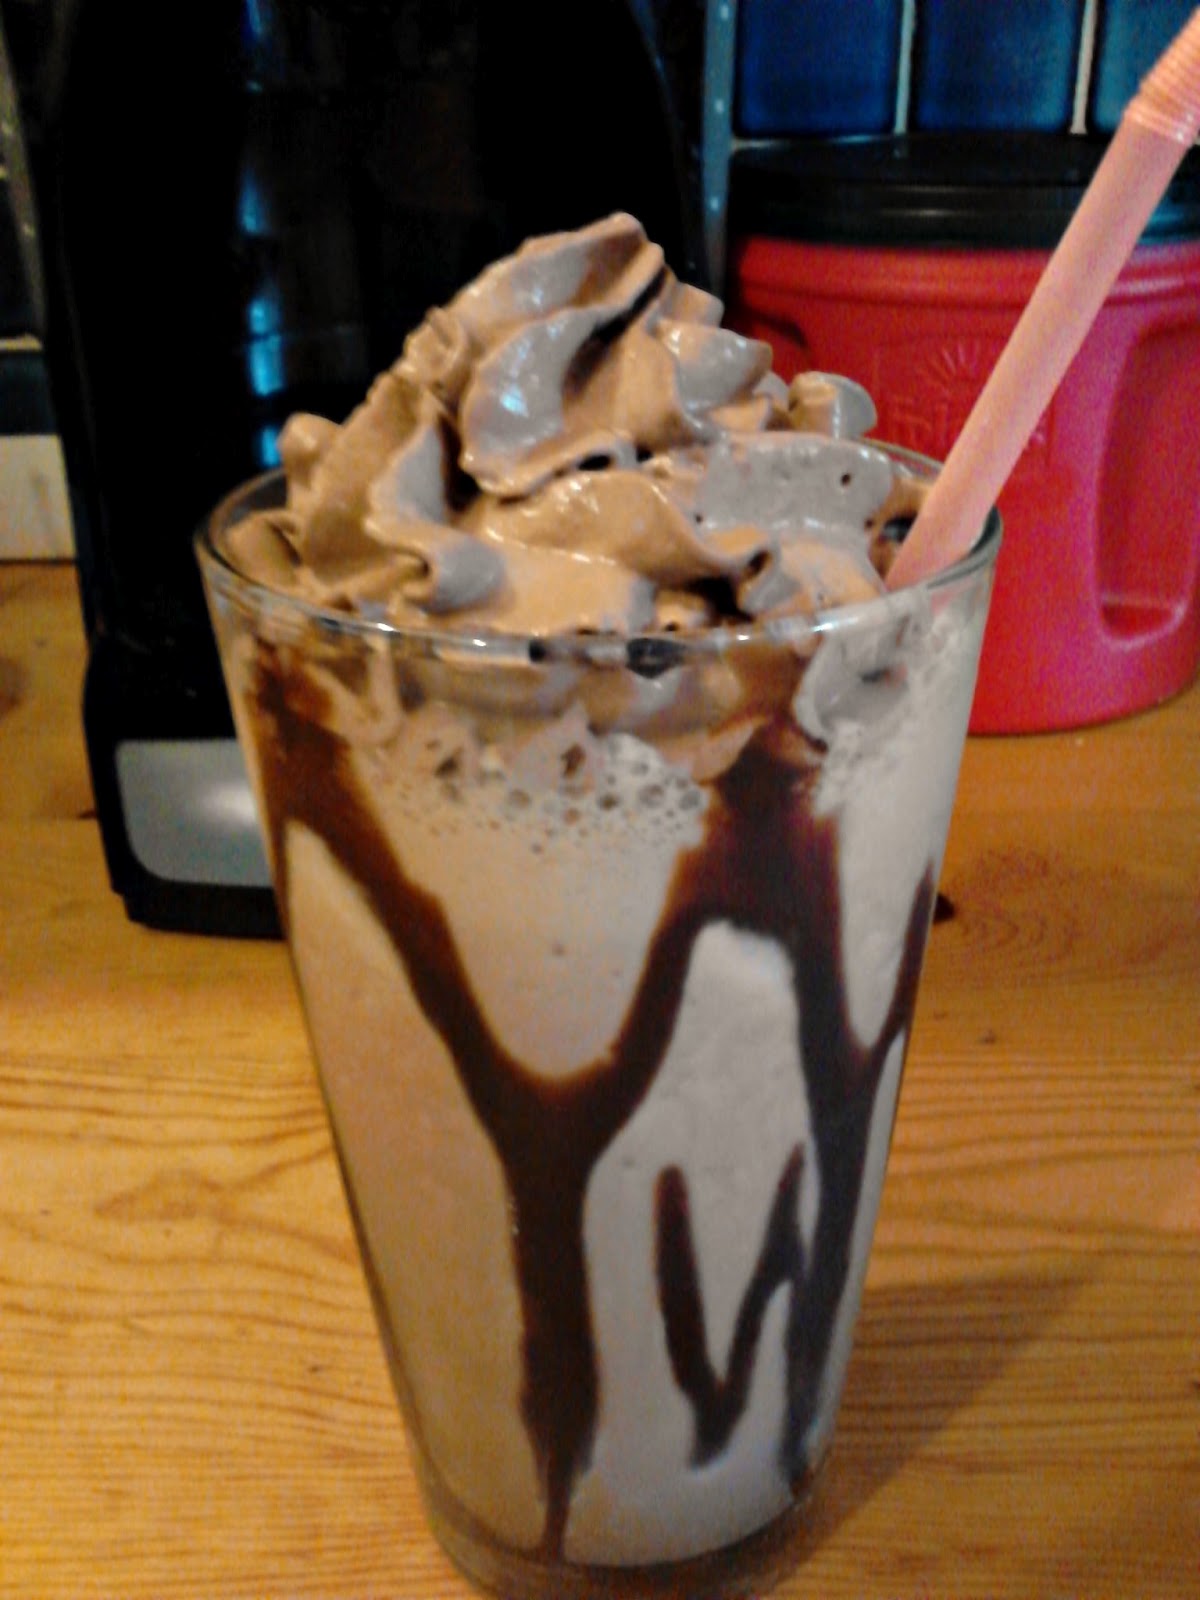 April's Country Life: Homemade Mocha Frappe